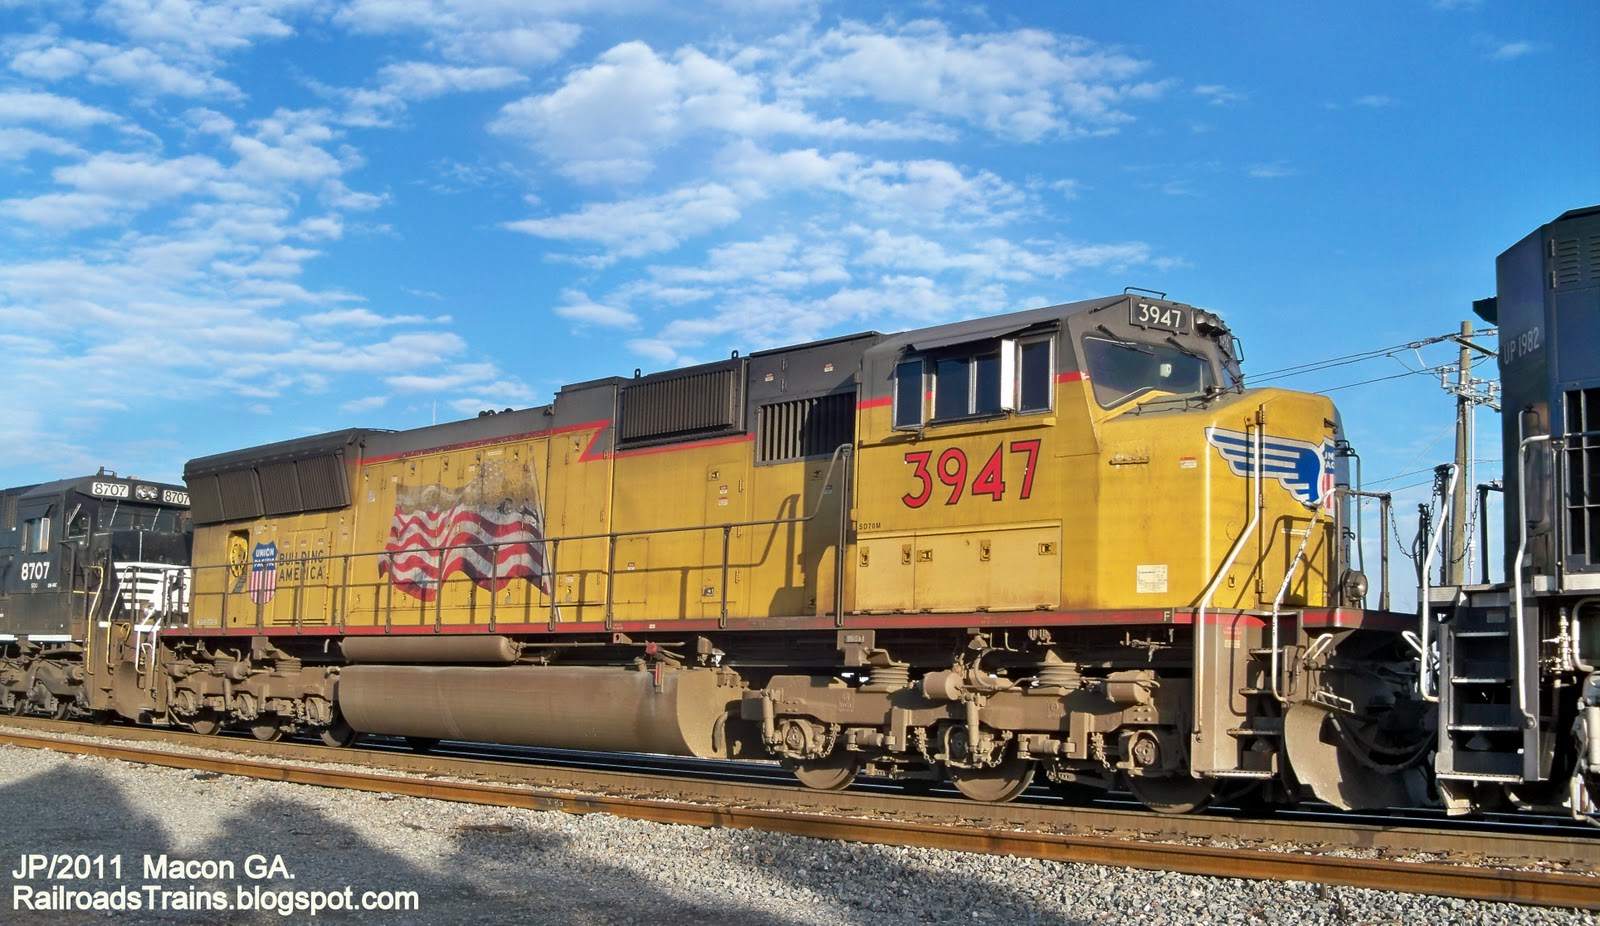 UP+3947+SD70M+Locomotive+Train+Engine+Macon+Georgia%2CUnion+Pacific+leased+to+Norfolk+Southern+Railroad.JPG